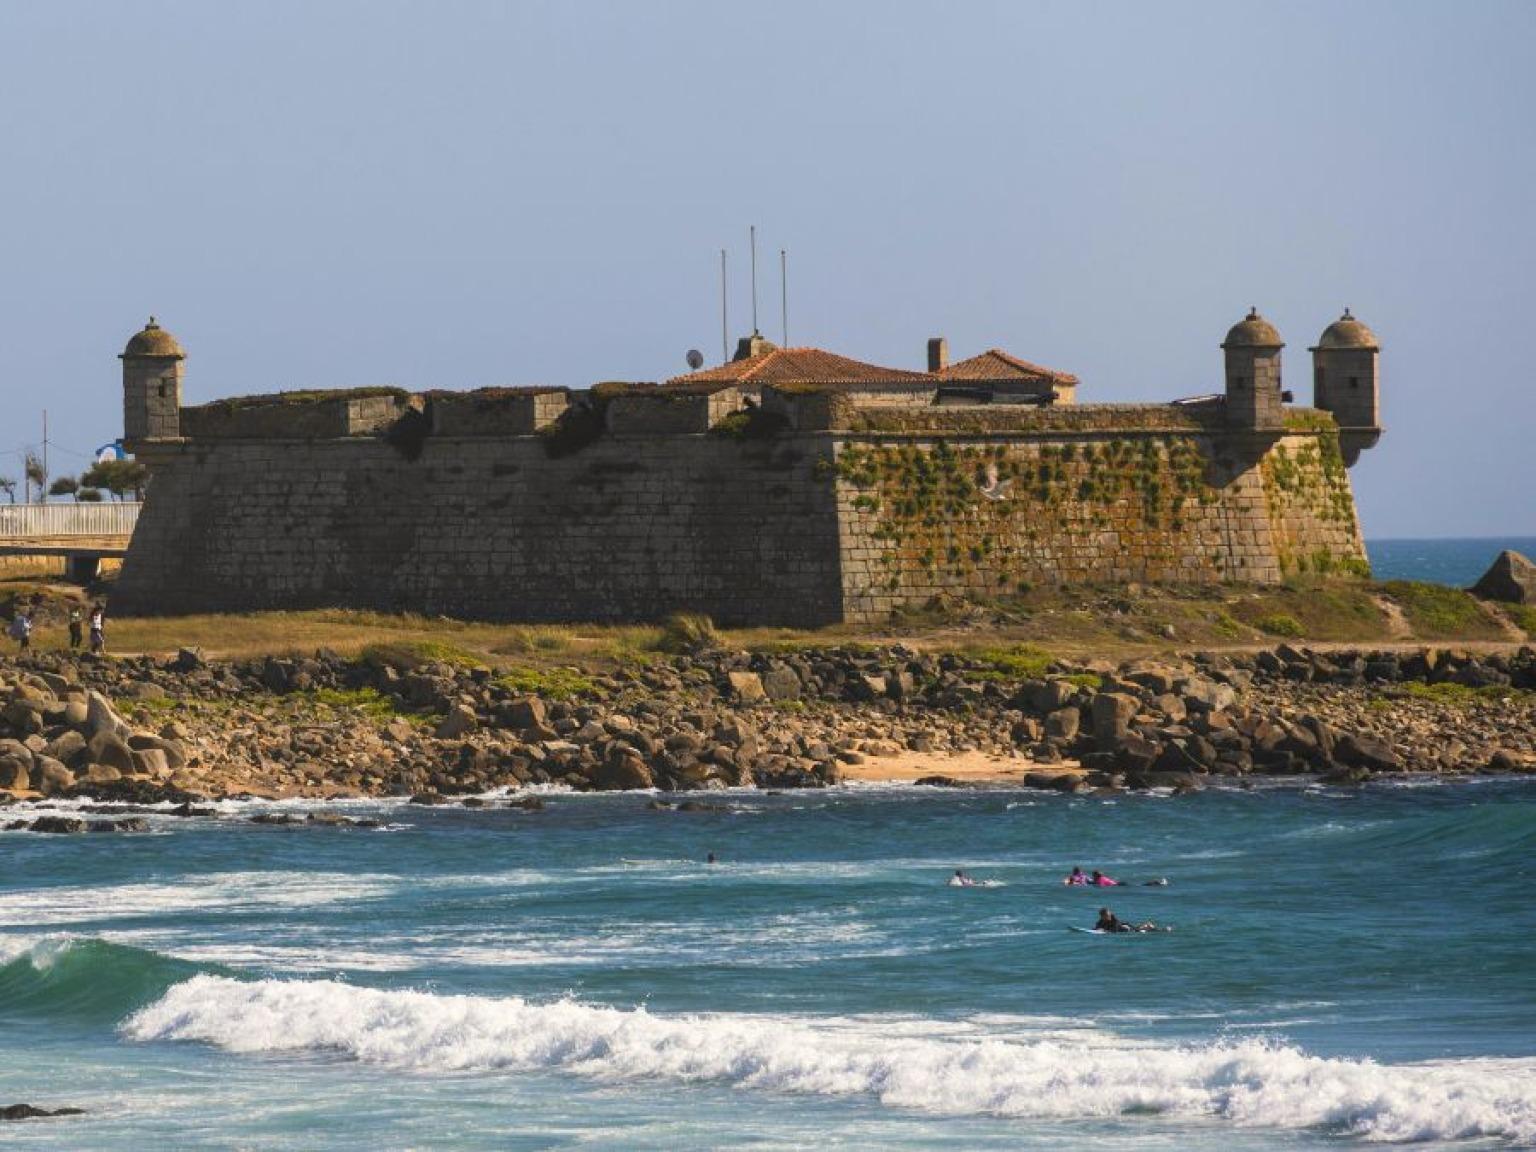 View of Castelo do Queijo fortress with the ocean in Matosinhos